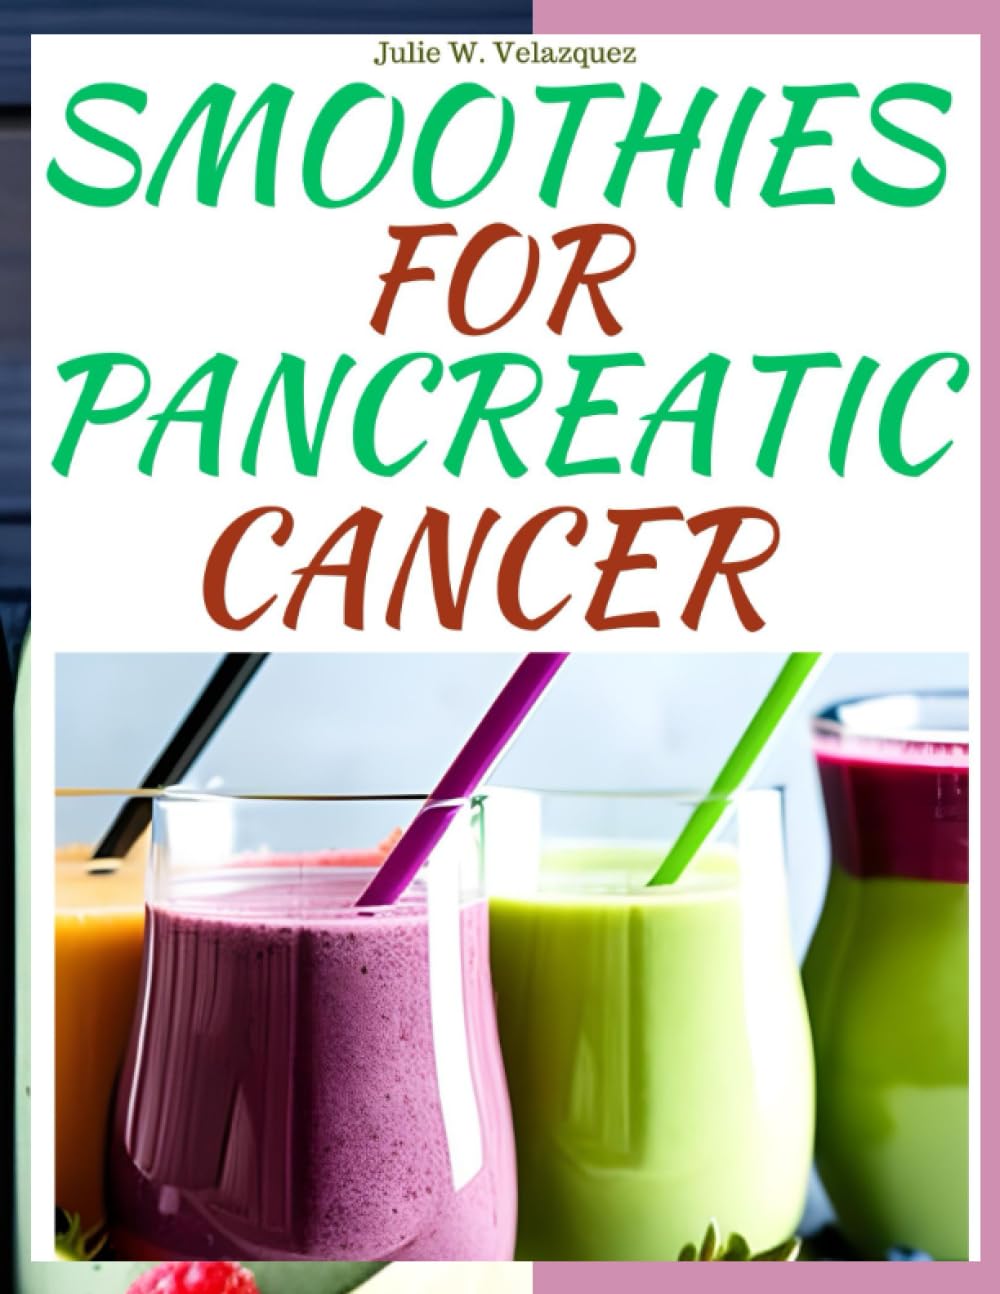 SMOOTHIES FOR PANCREATIC CANCER: Delicious and Healing Smoothie Recipes to Support Pancreatic Cancer Patients and Promote Overall Well-Being.